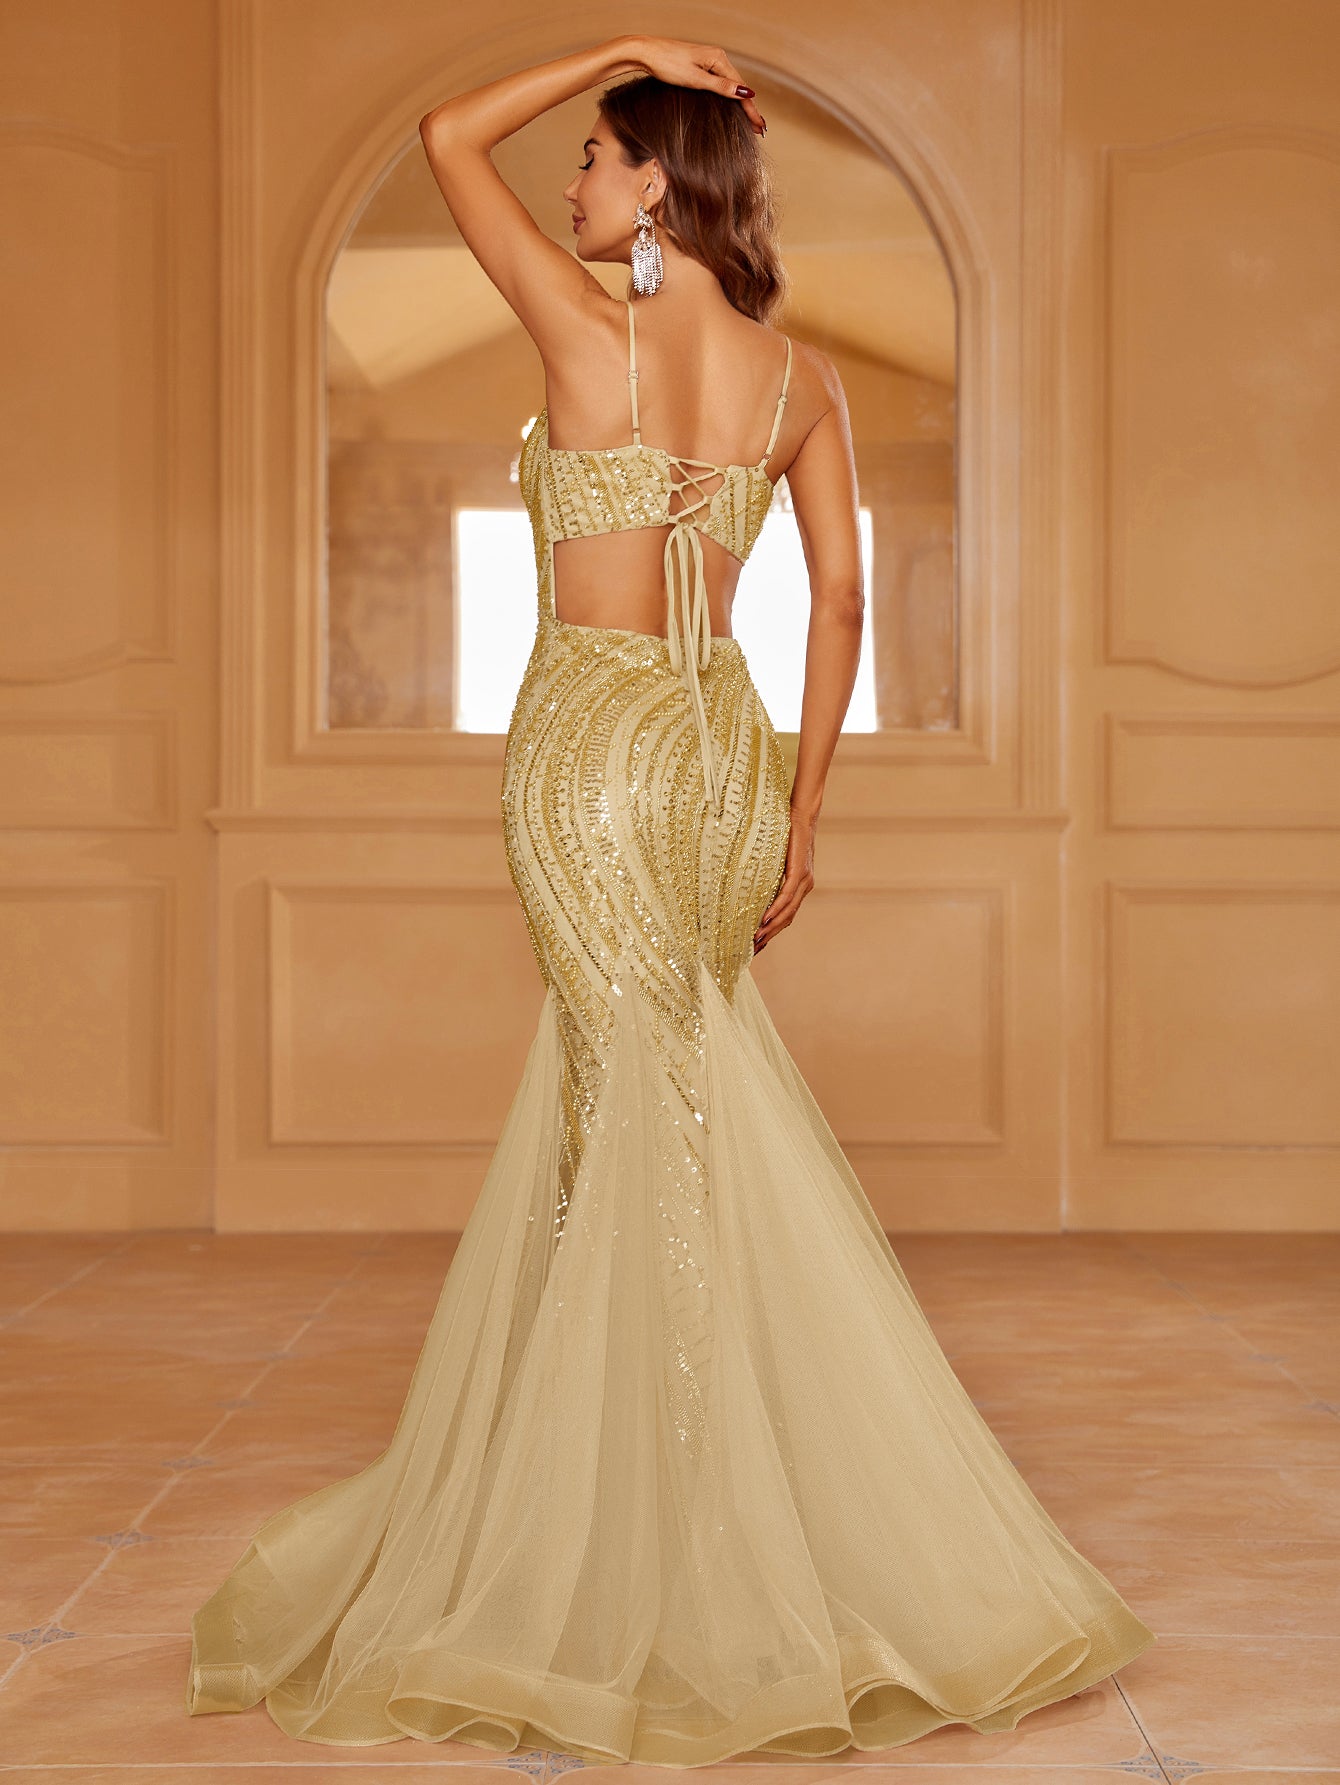 Spaghetti Strap Lace Up Backless Sequin Mermaid Dress